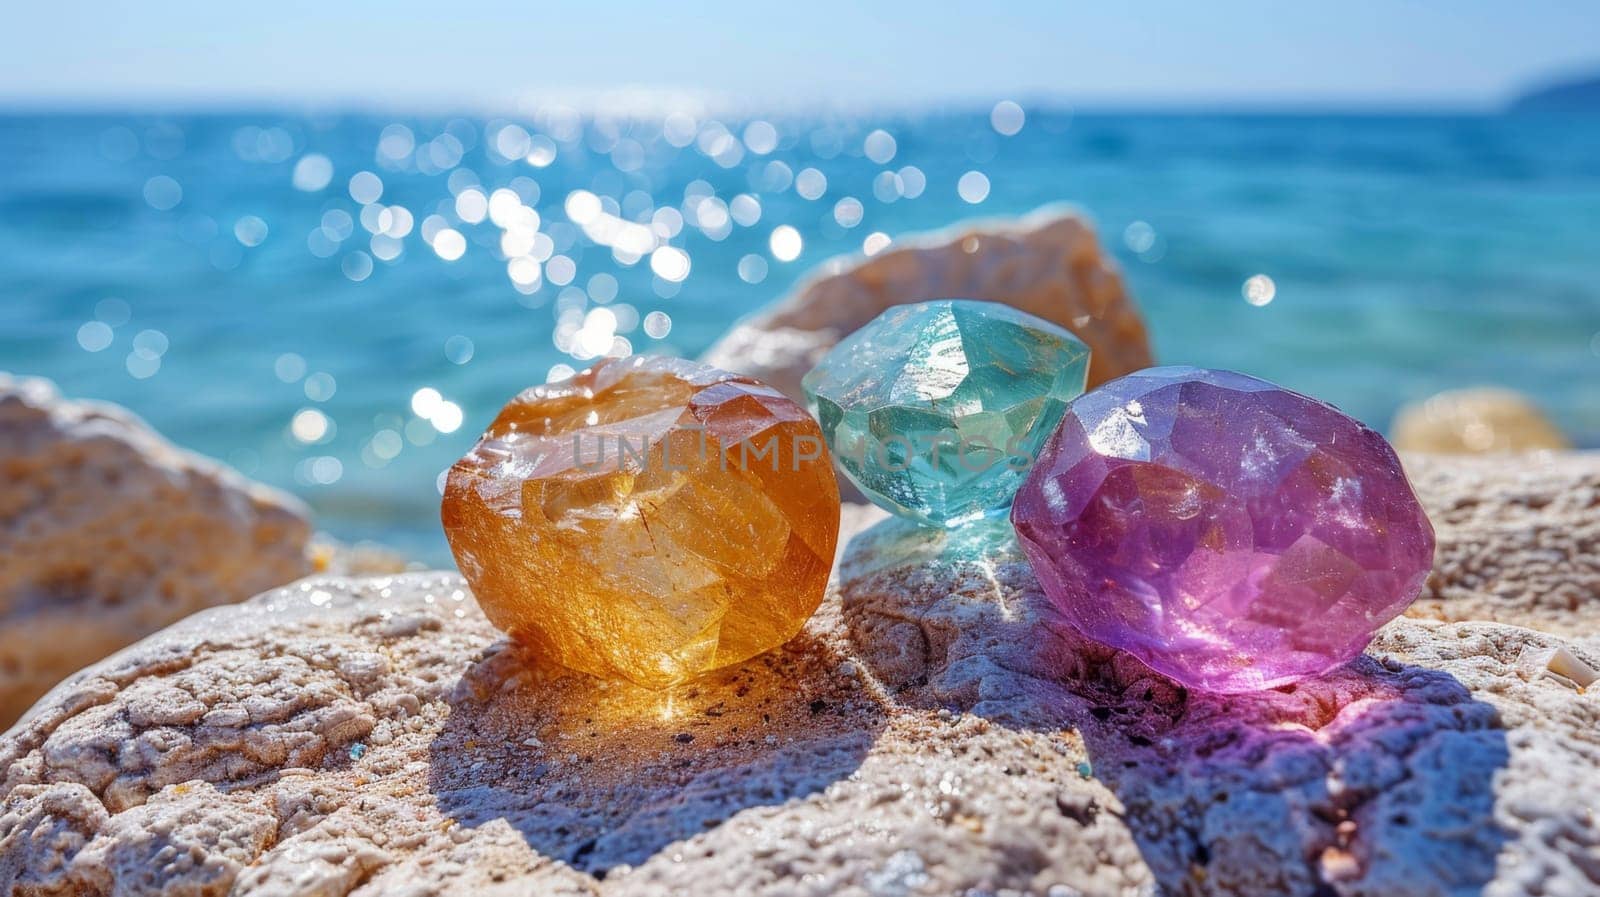 Natural shining glass stones on the seashore. The beach with glass stones.